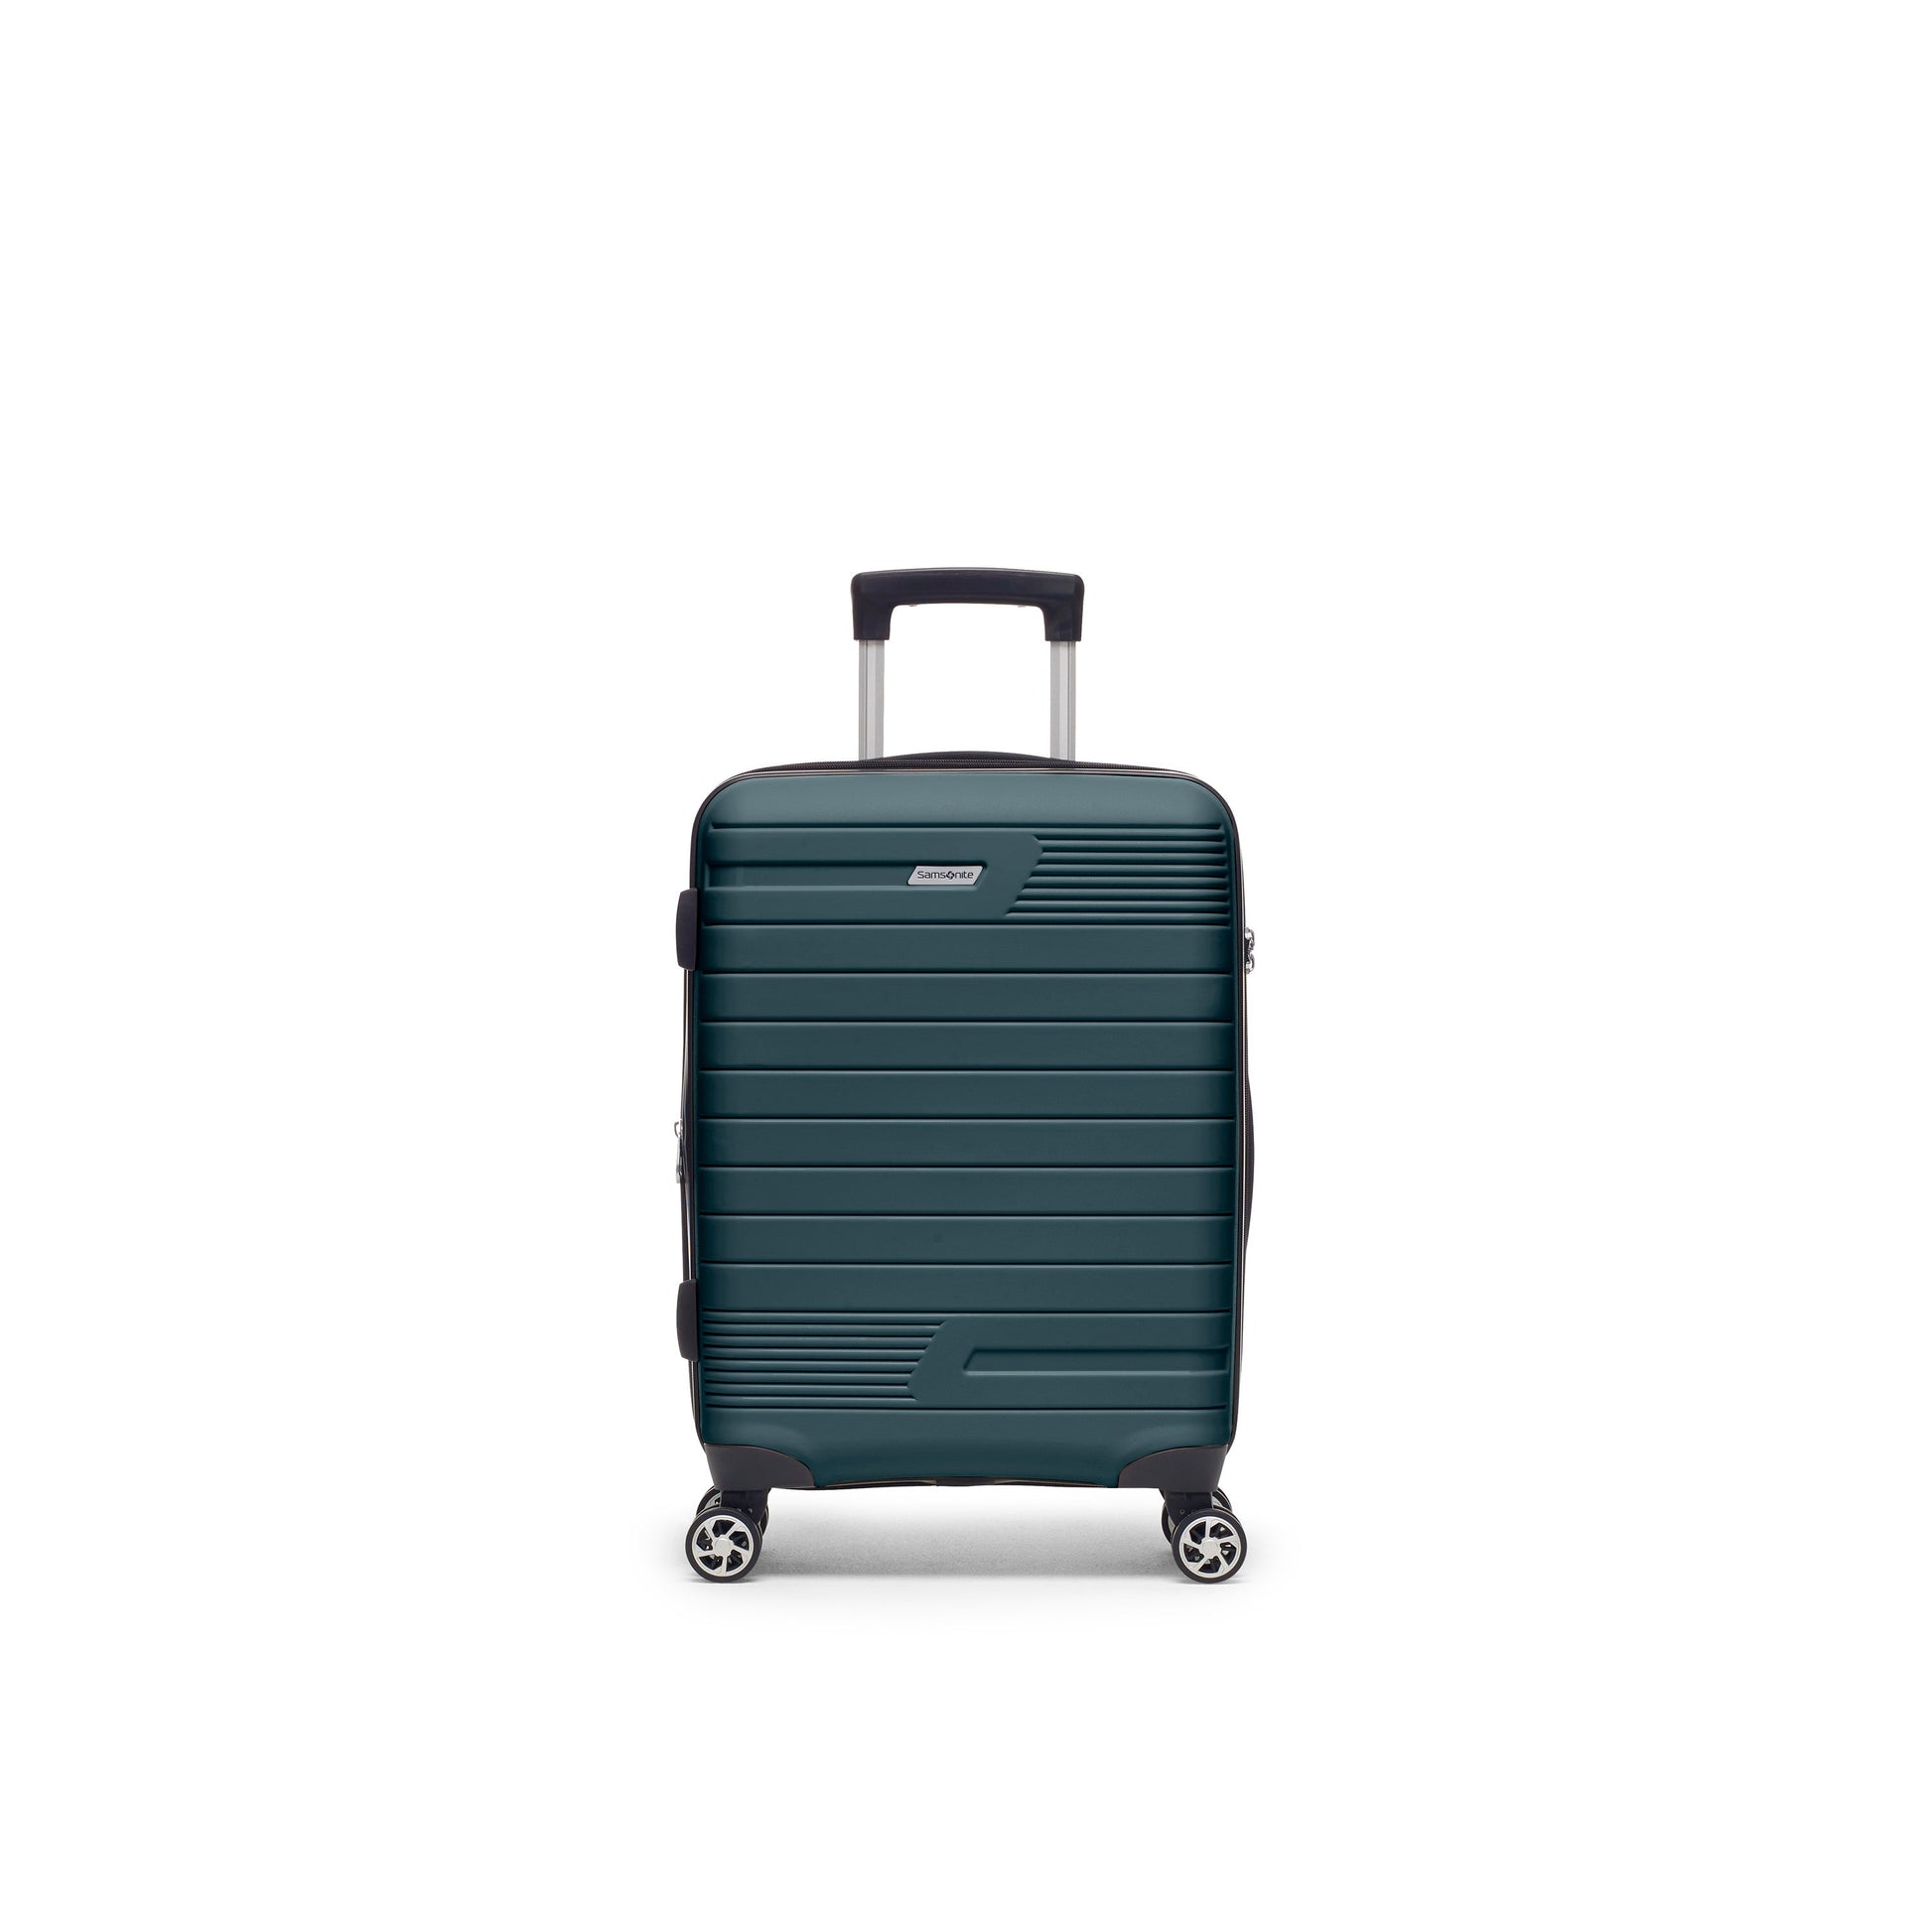 Samsonite Sirocco Collection Spinner Carry-On Expandable Luggage - Teal